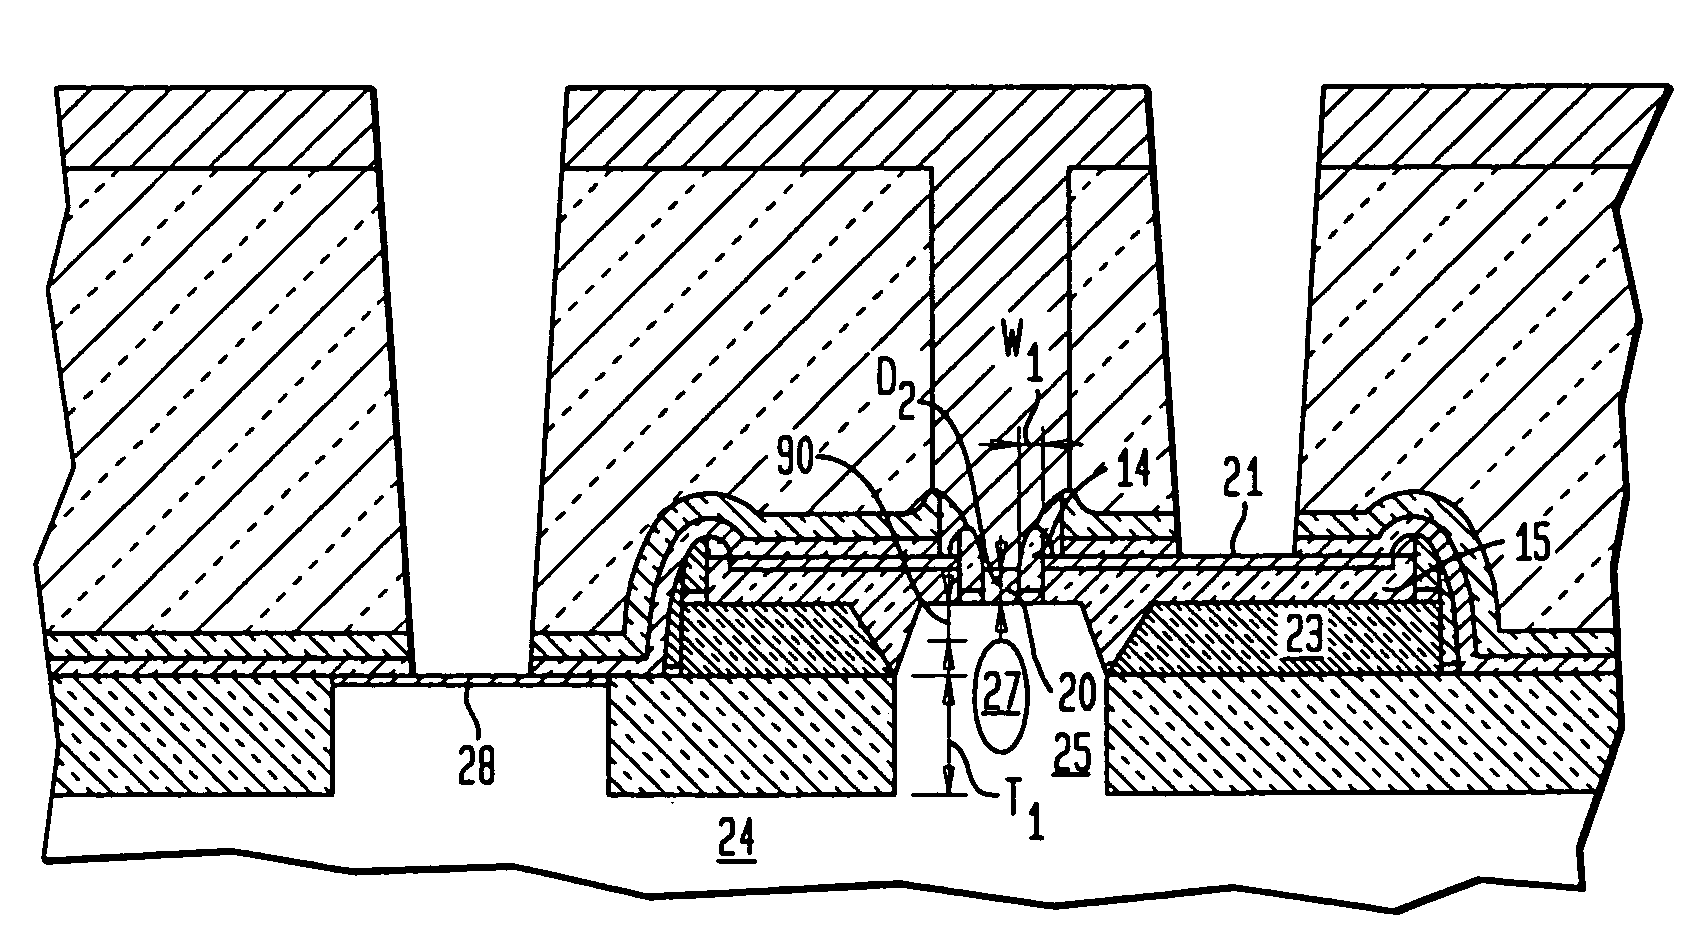 Transistor structure with minimized parasitics and method of fabricating the same